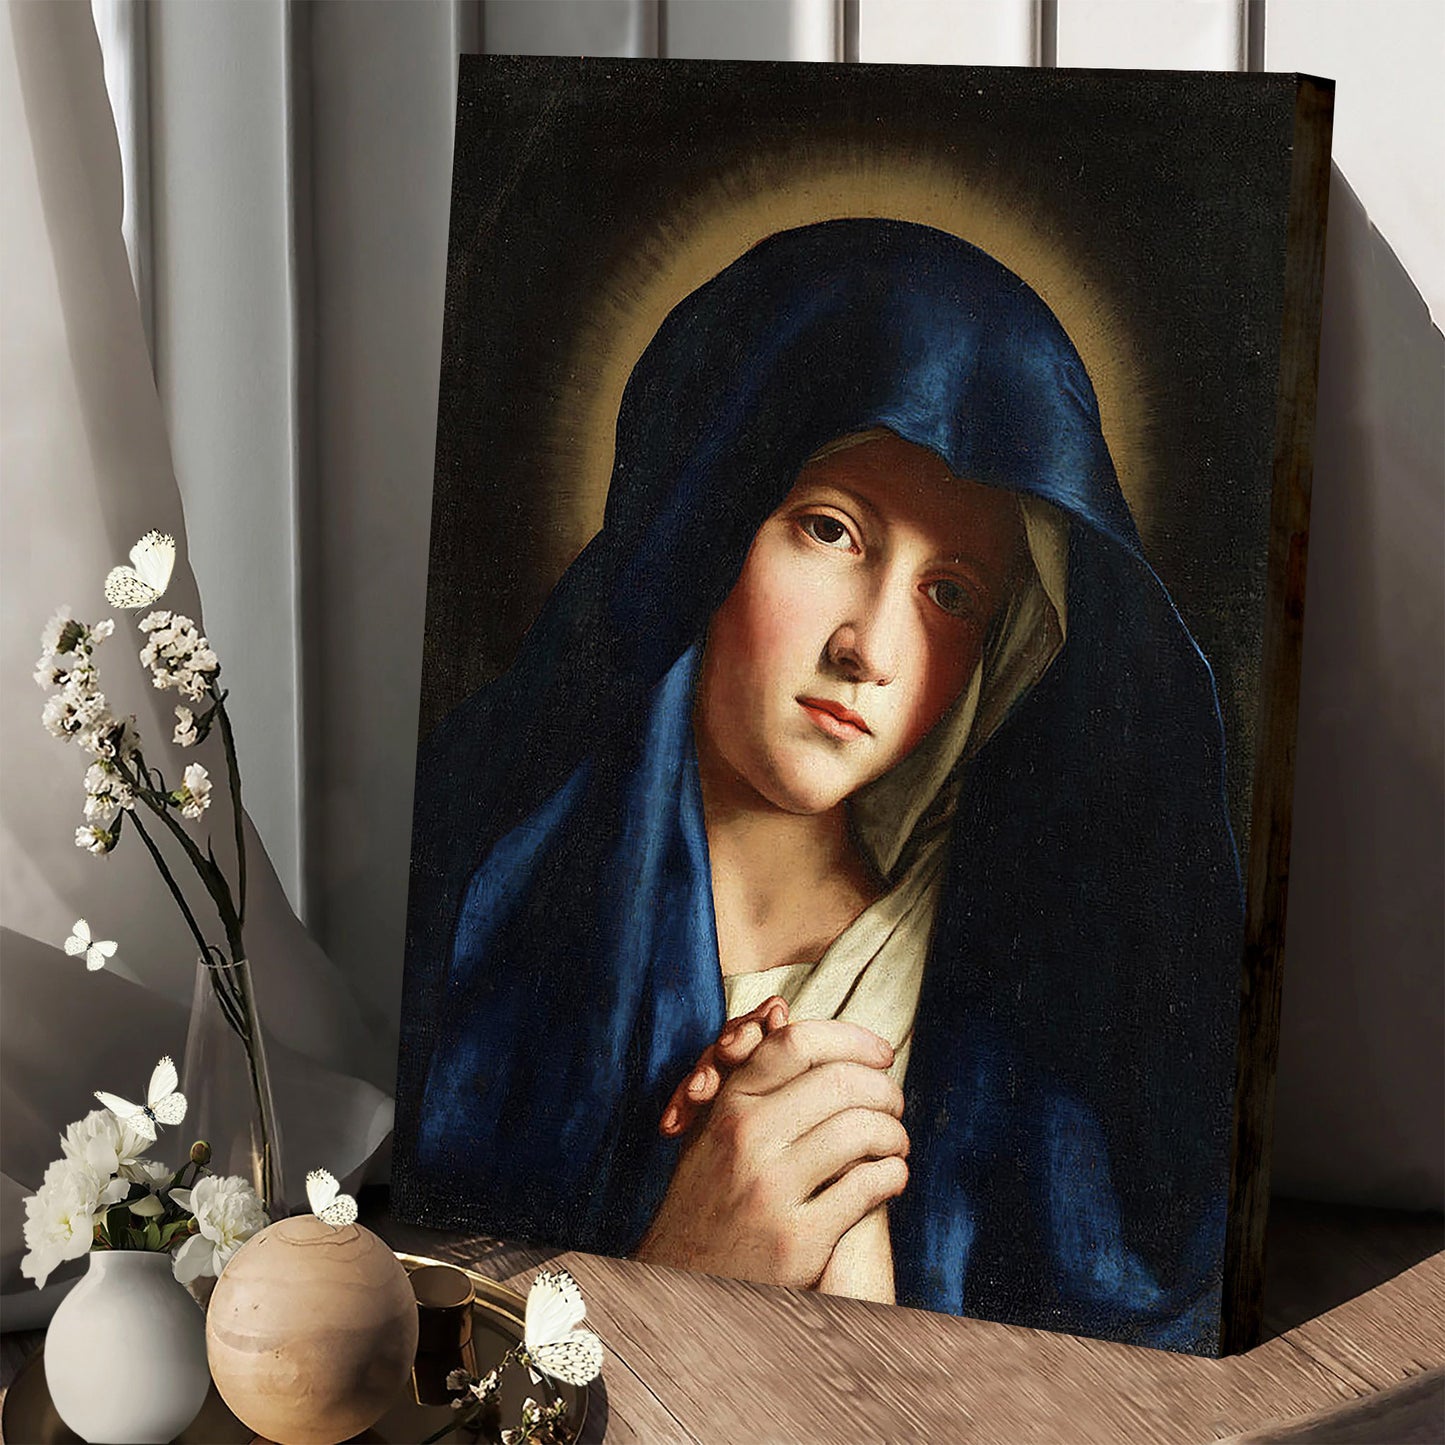 Young Virgin Mary  Canvas Wall Art - Jesus Canvas Pictures - Christian Wall Art